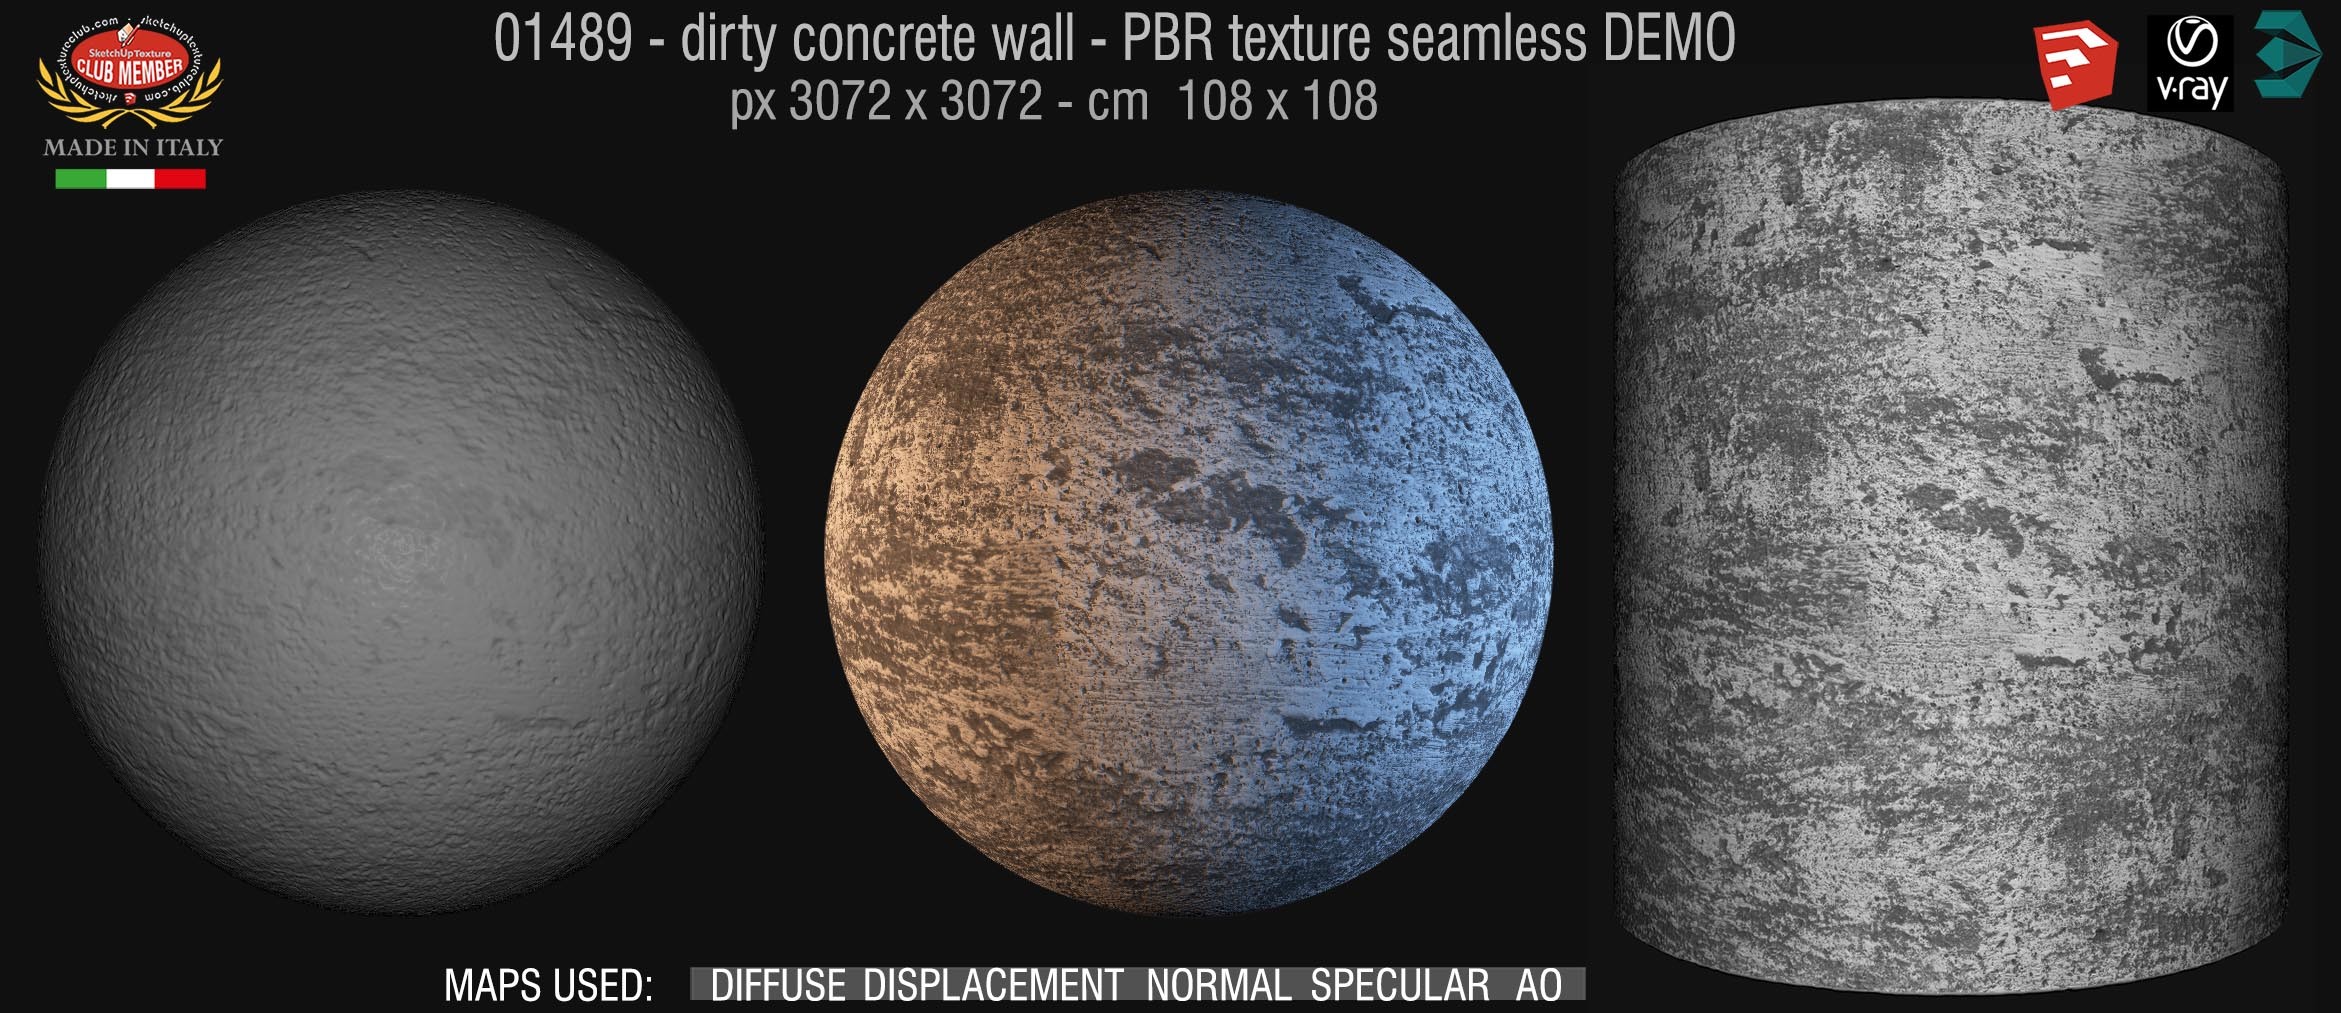 01489 Concrete bare dirty wall PBR texture seamless DEMO